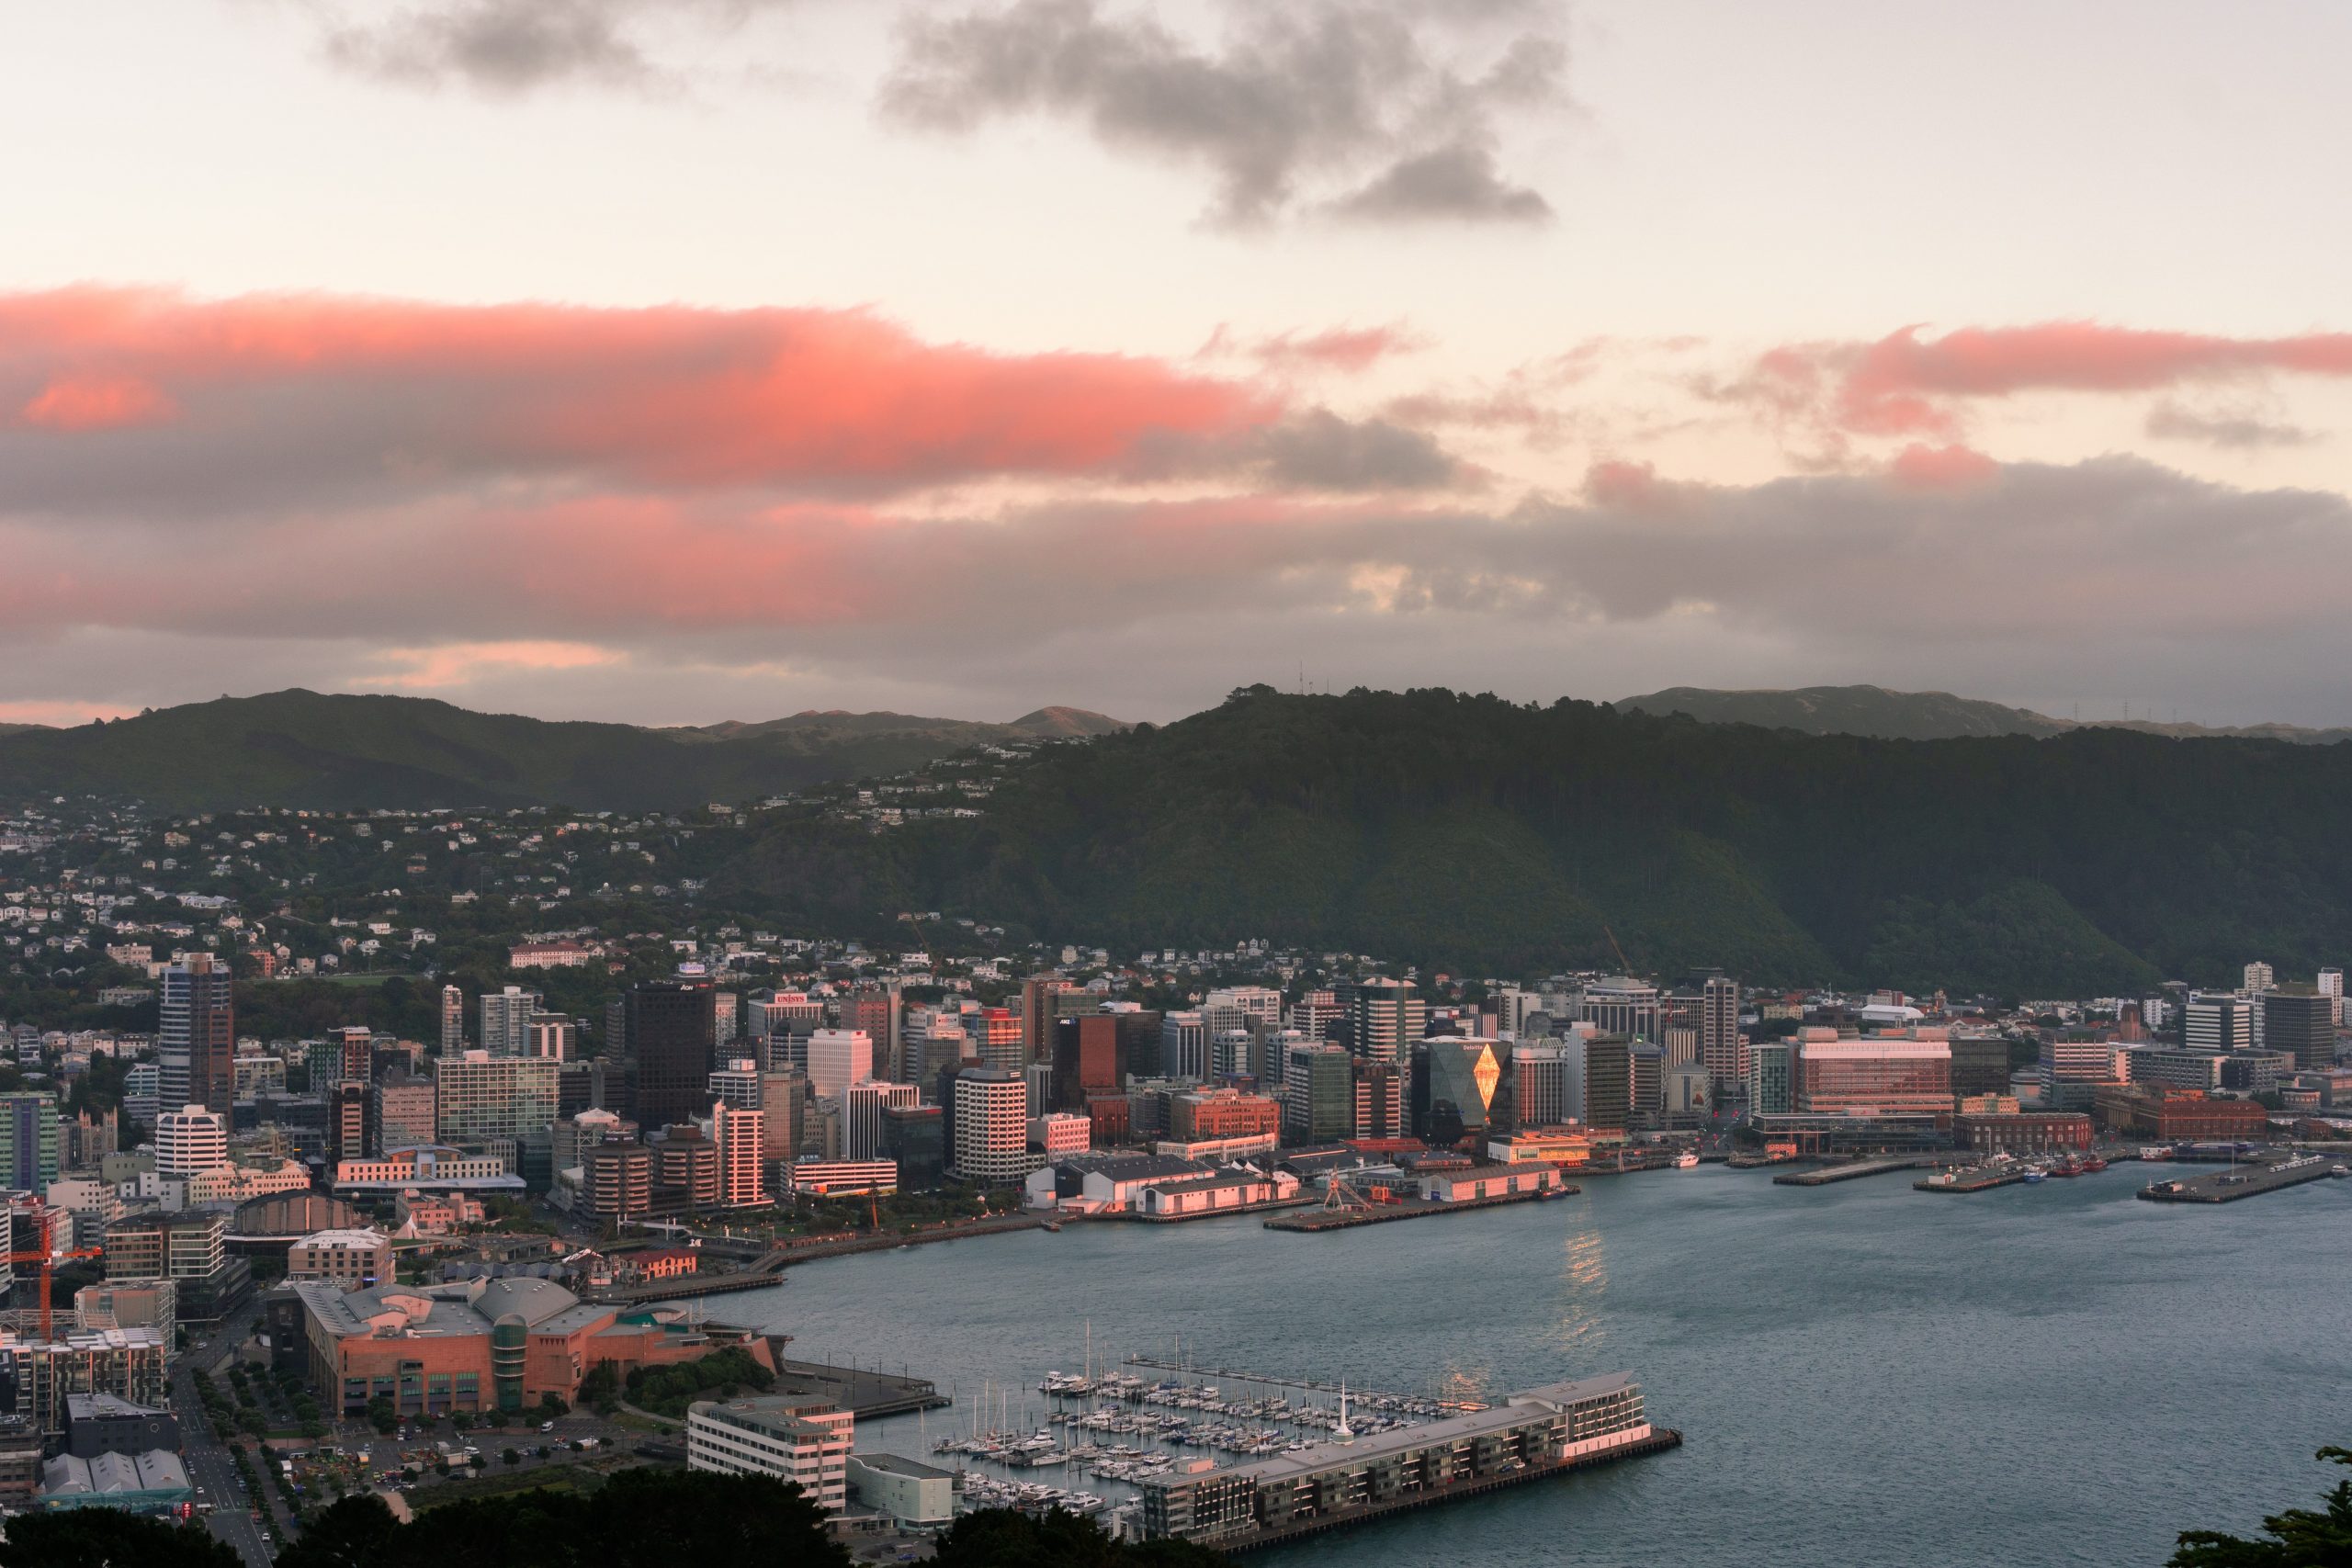 A vantage point overlooking a waterfront city at sunset with a marina, high rise buildings and green mountains in the backdrop.